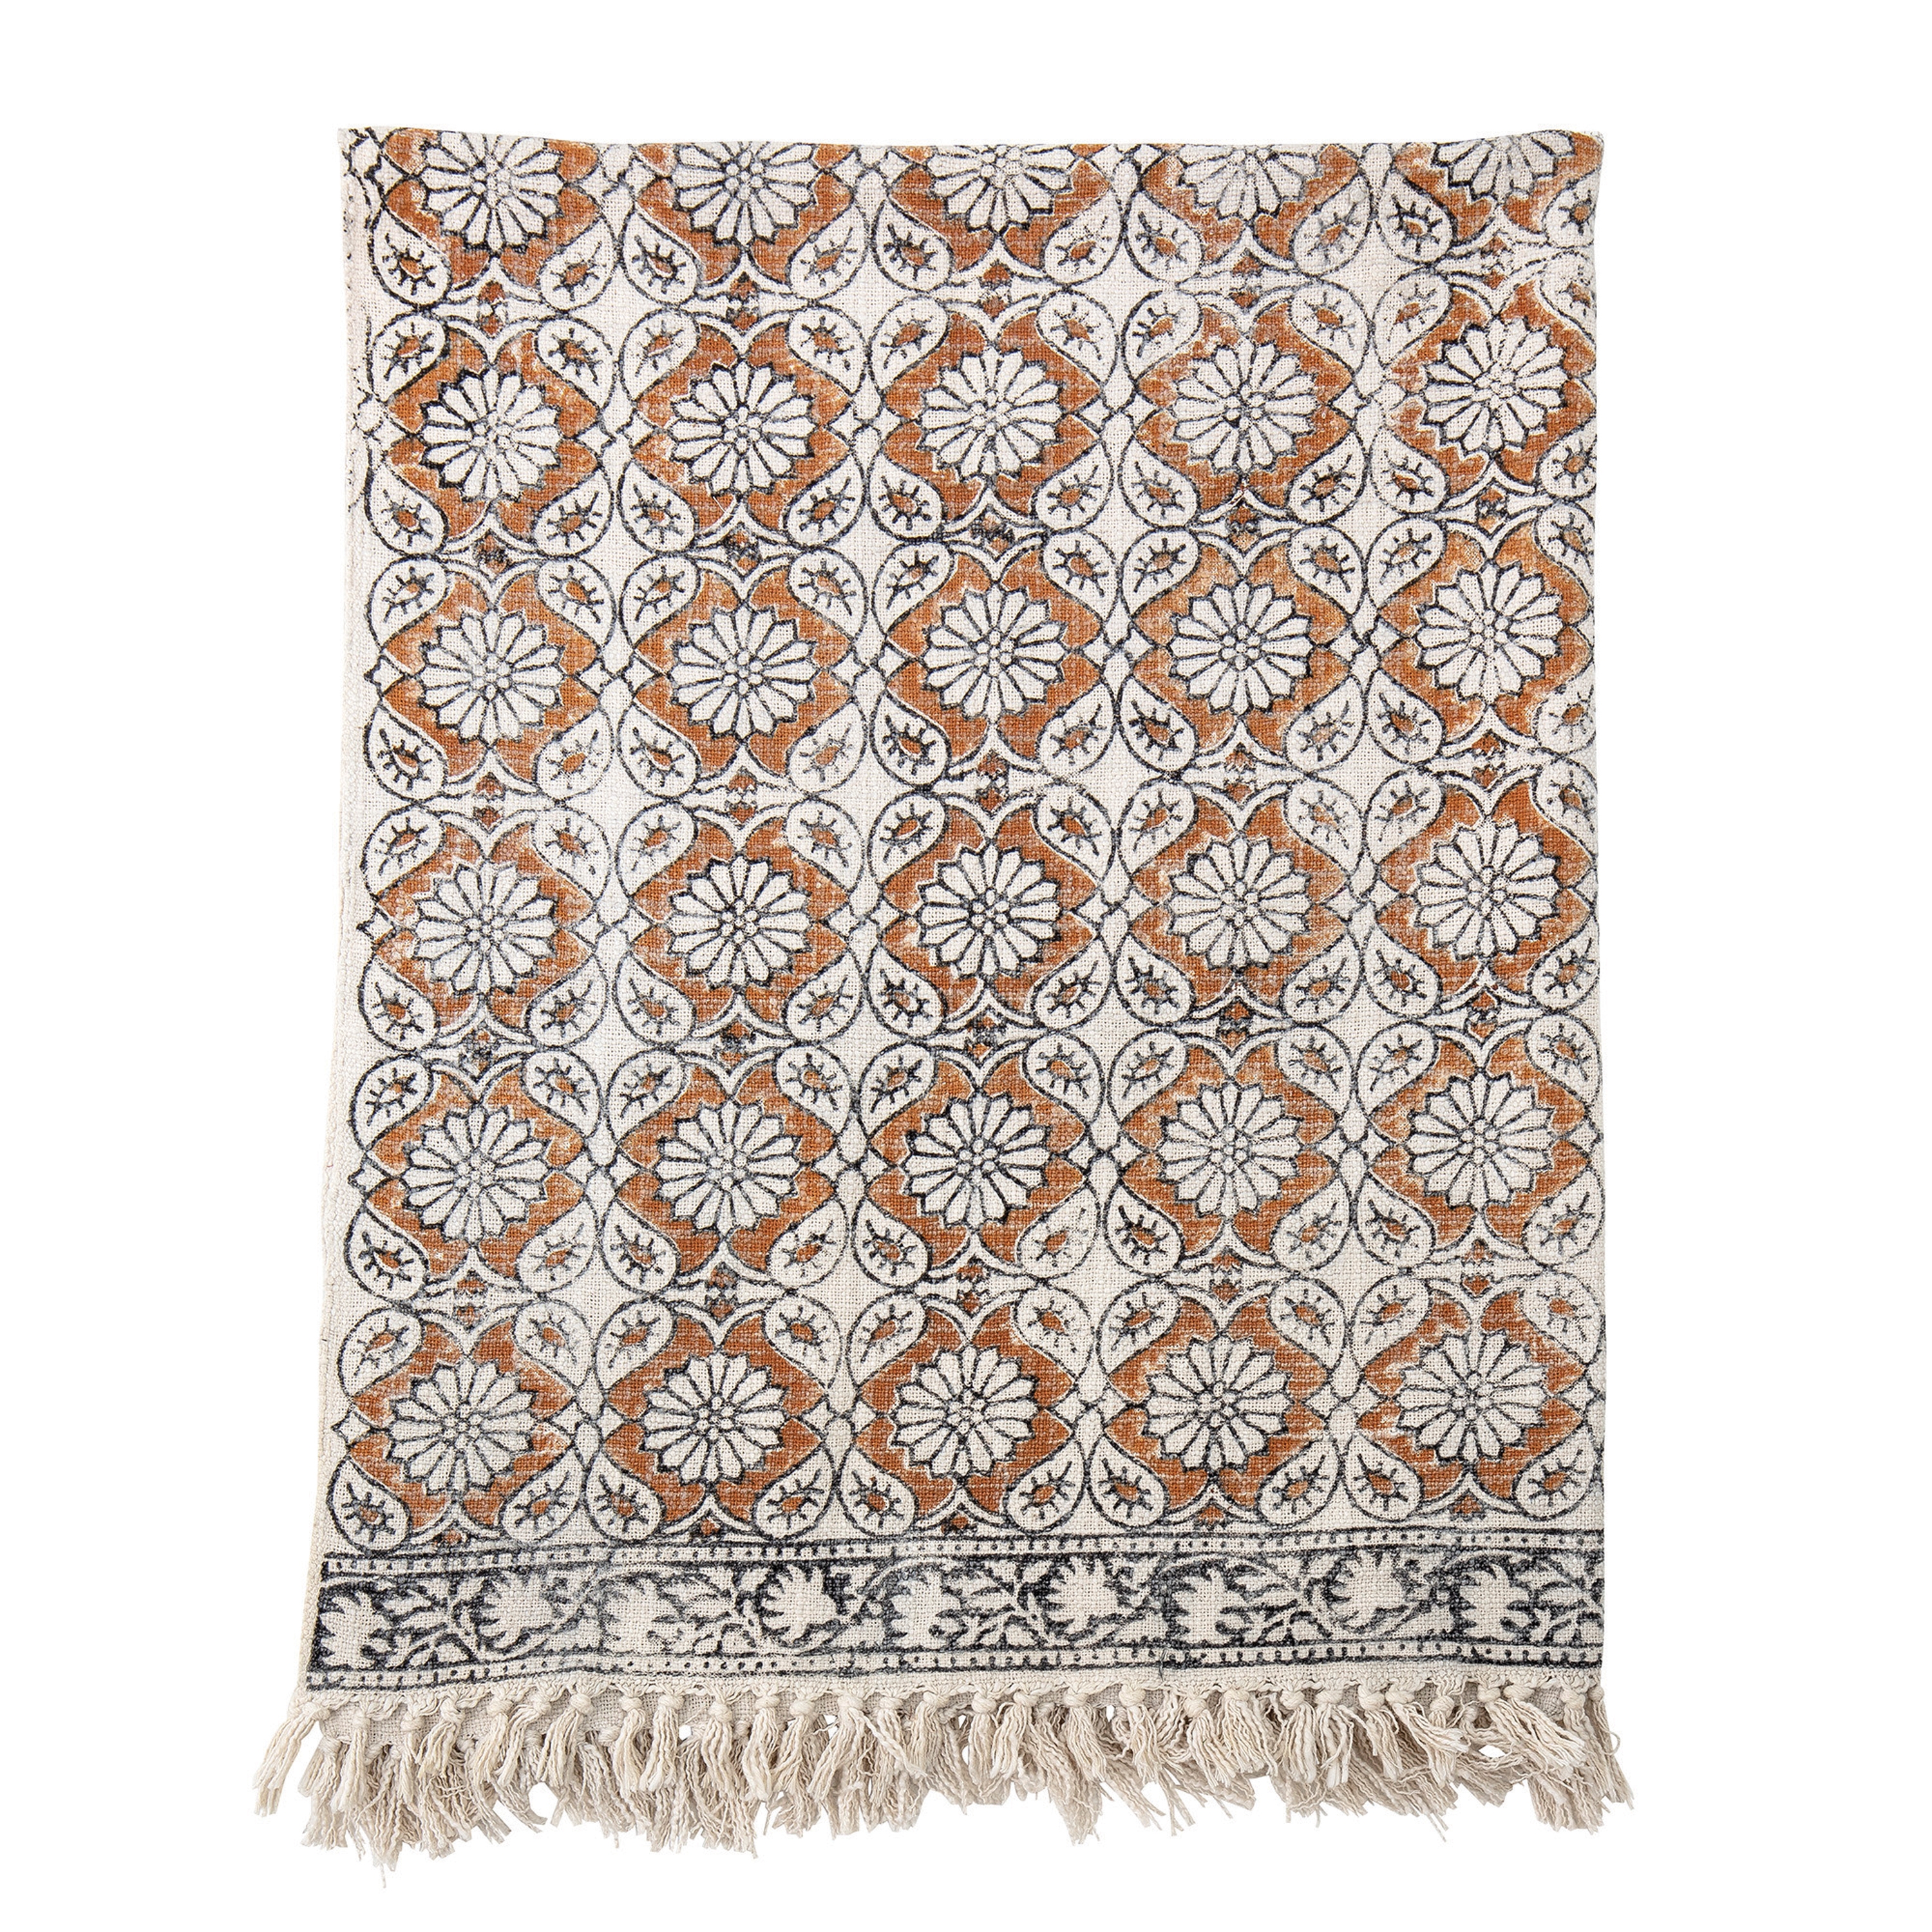 60" x 50" Cotton Printed Throw with Floral Design & Fringe - Image 0